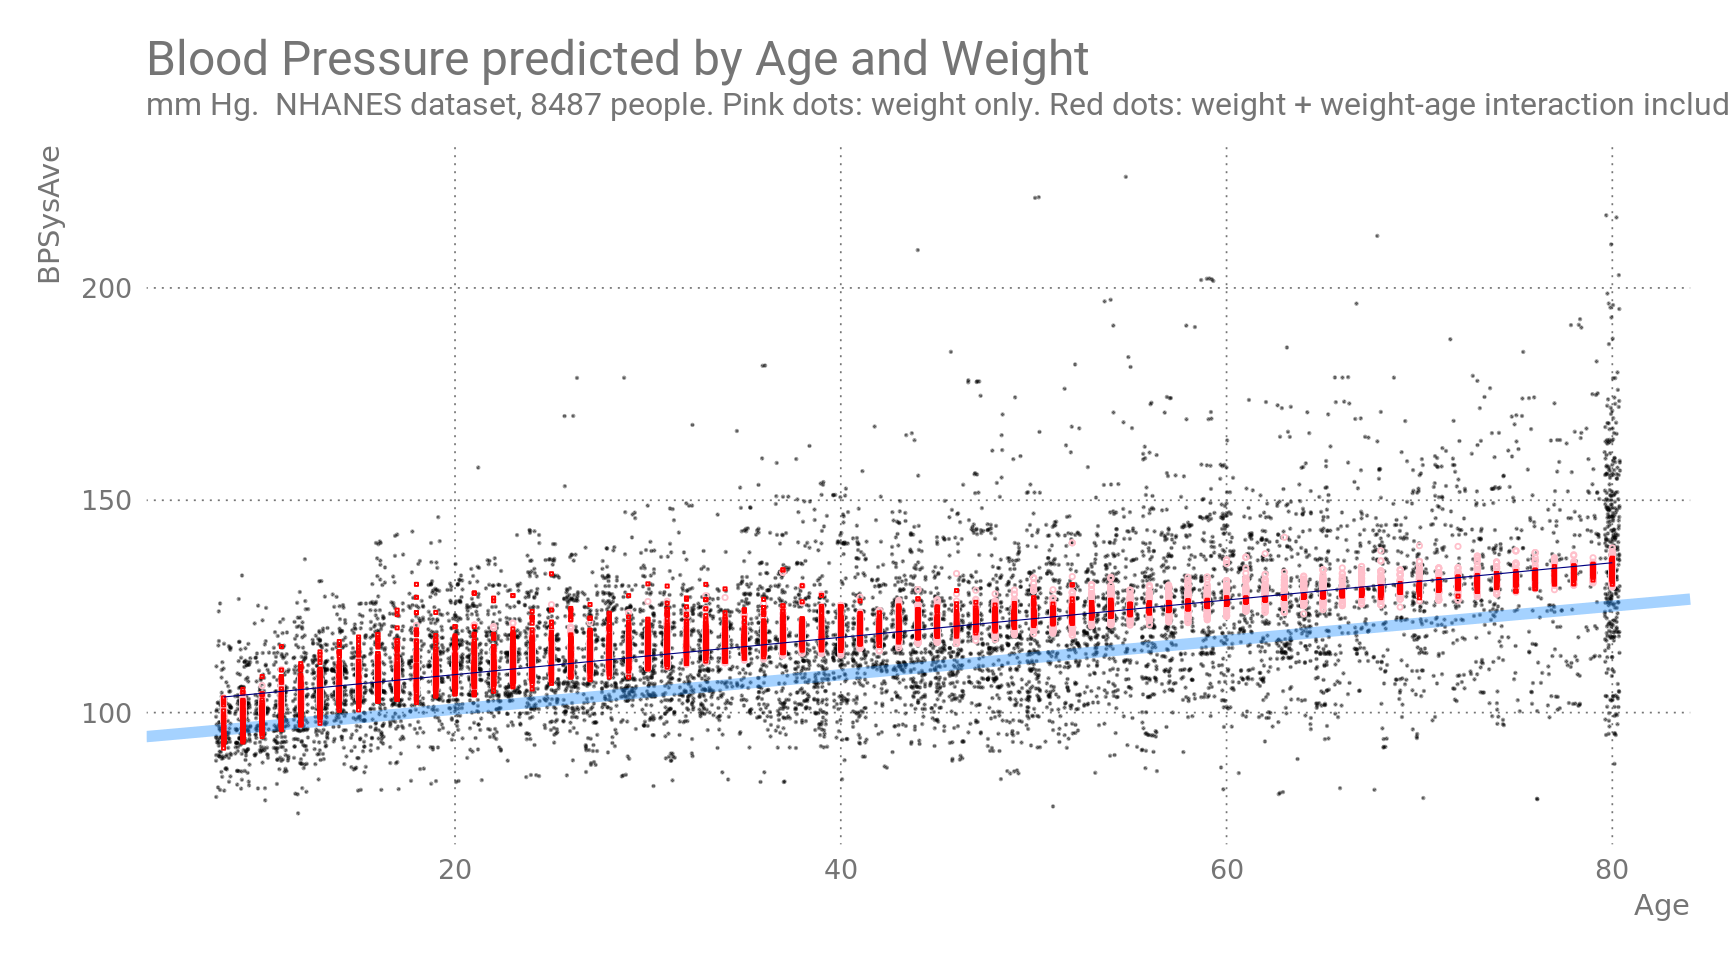 Blood Pressure as a function of Age and Weight.  Predicted values are shown in pink/red, observed values in black. Blue line is BP predicted a function of Age alone. Black line is BP modeled with weight/age interaction effect.